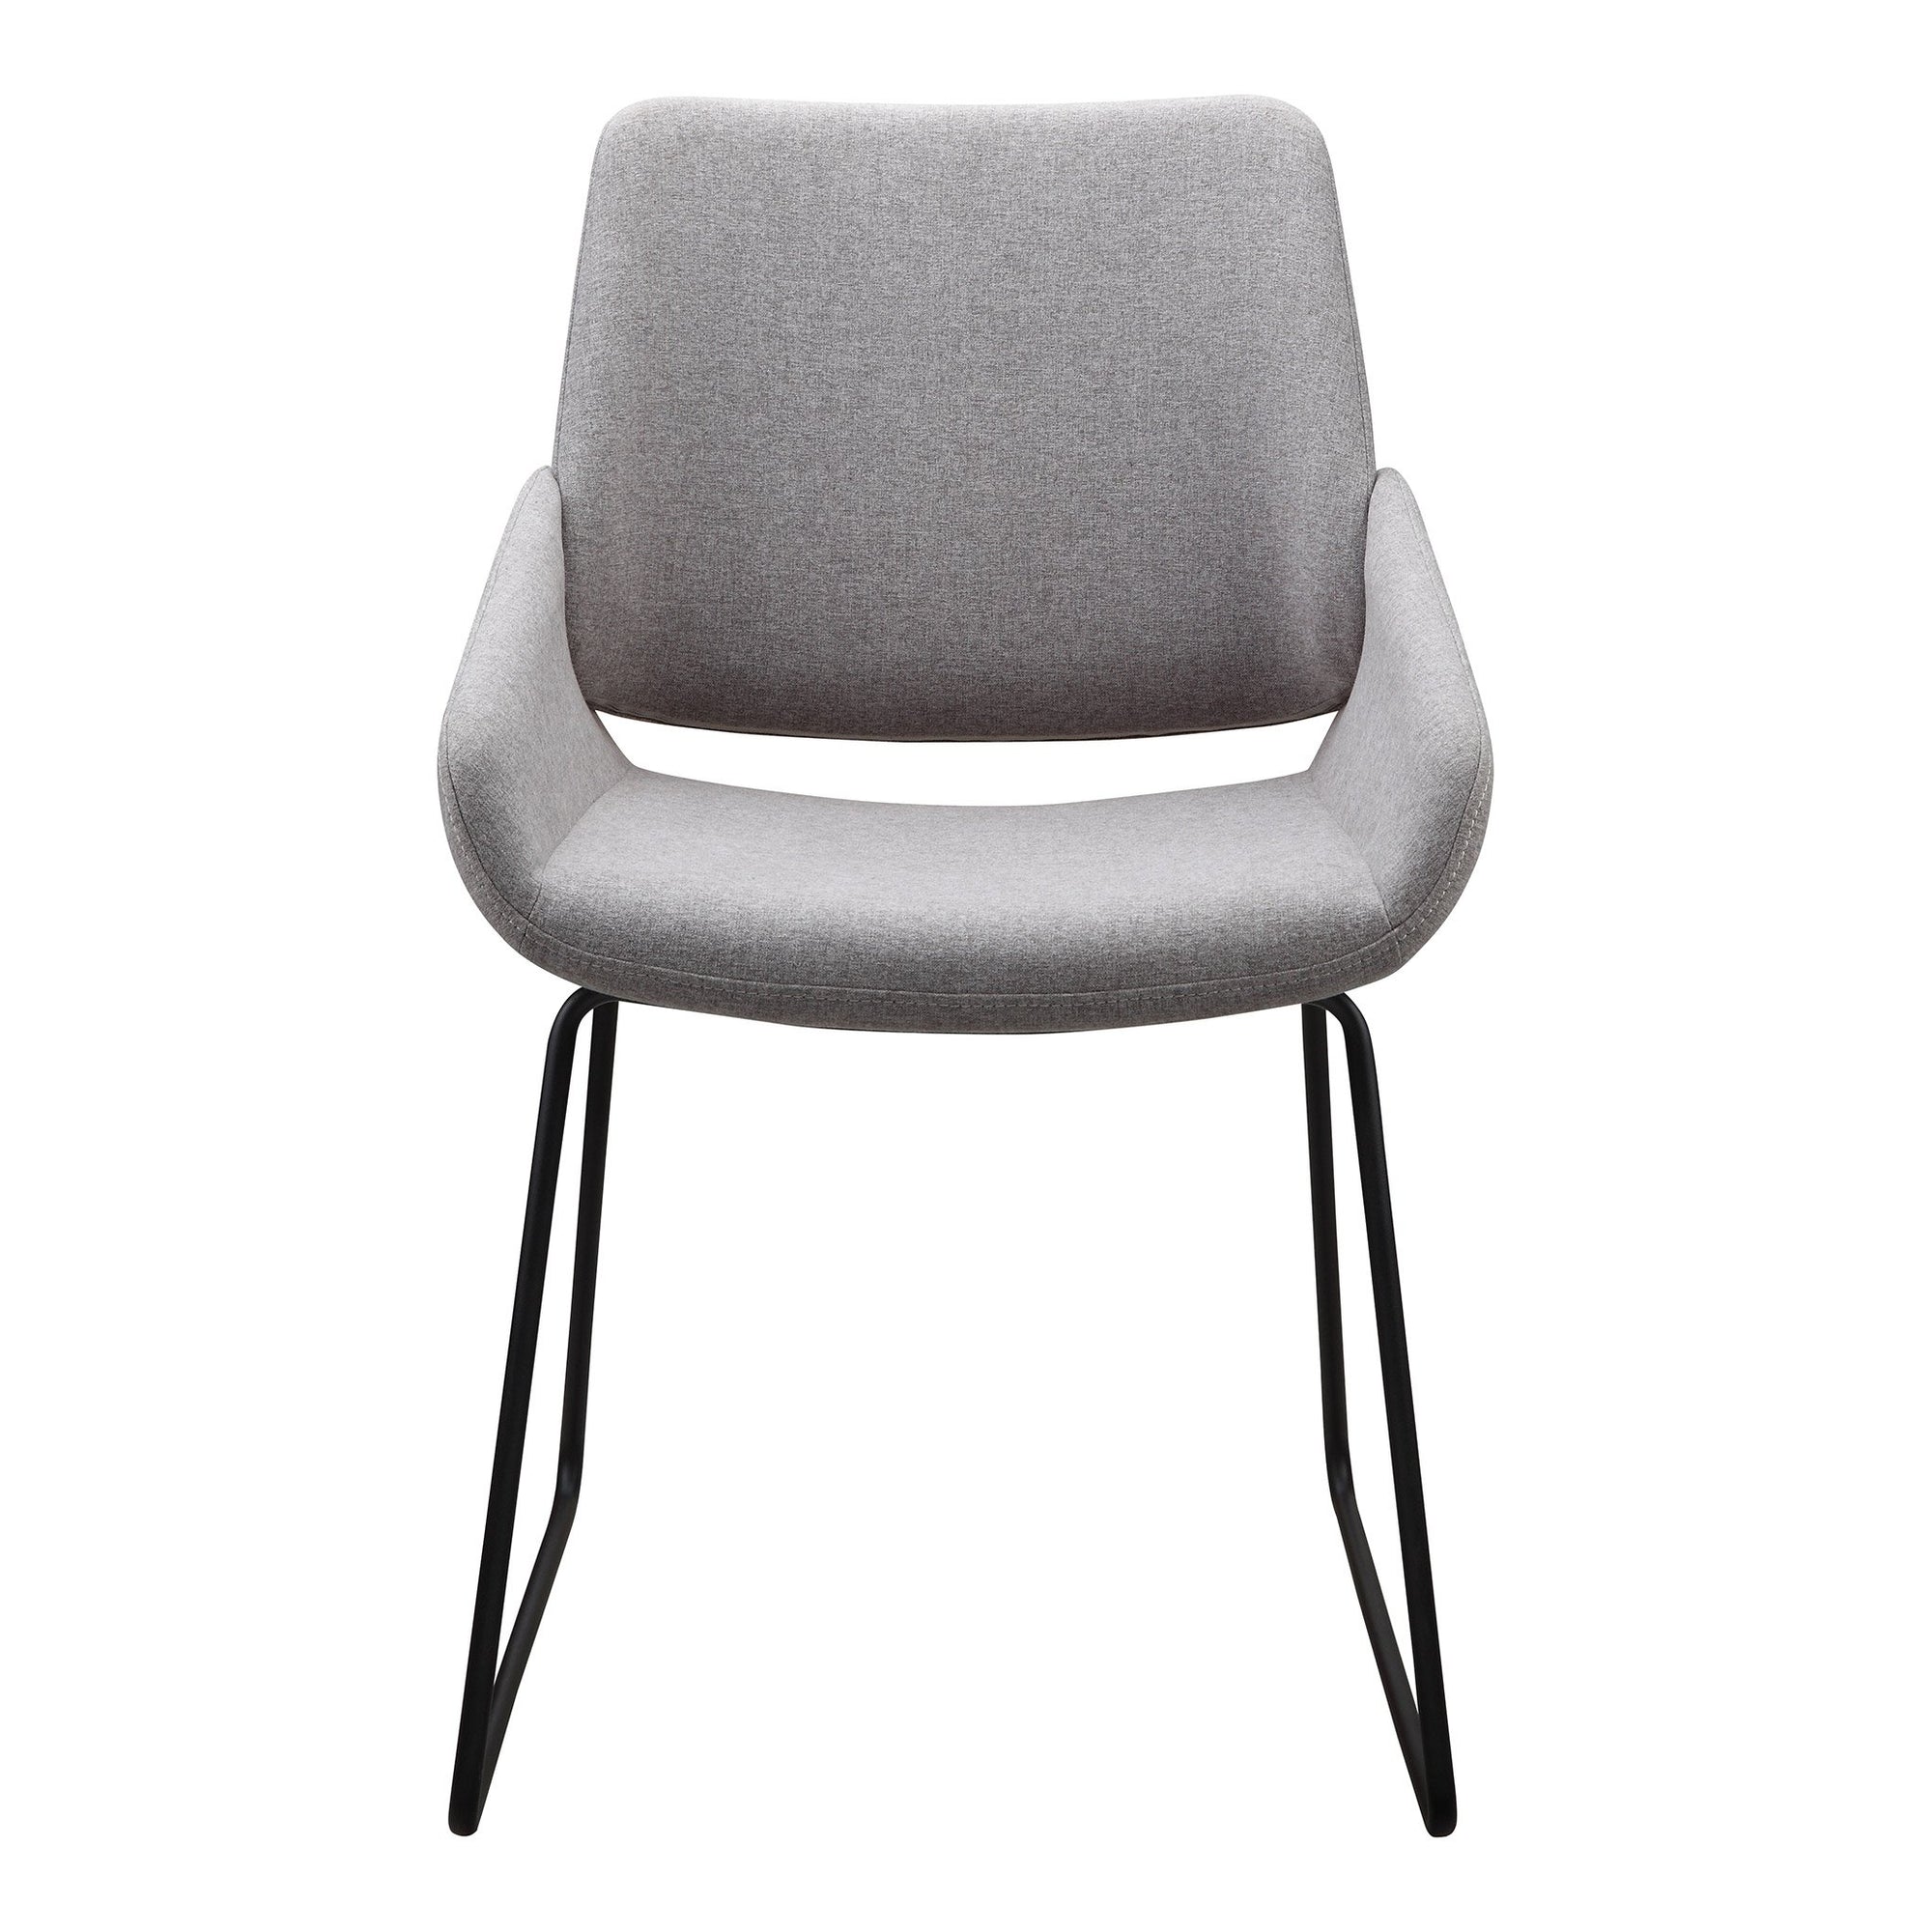 MOES-LISBOA DINING CHAIR-Dining Chairs-MODTEMPO